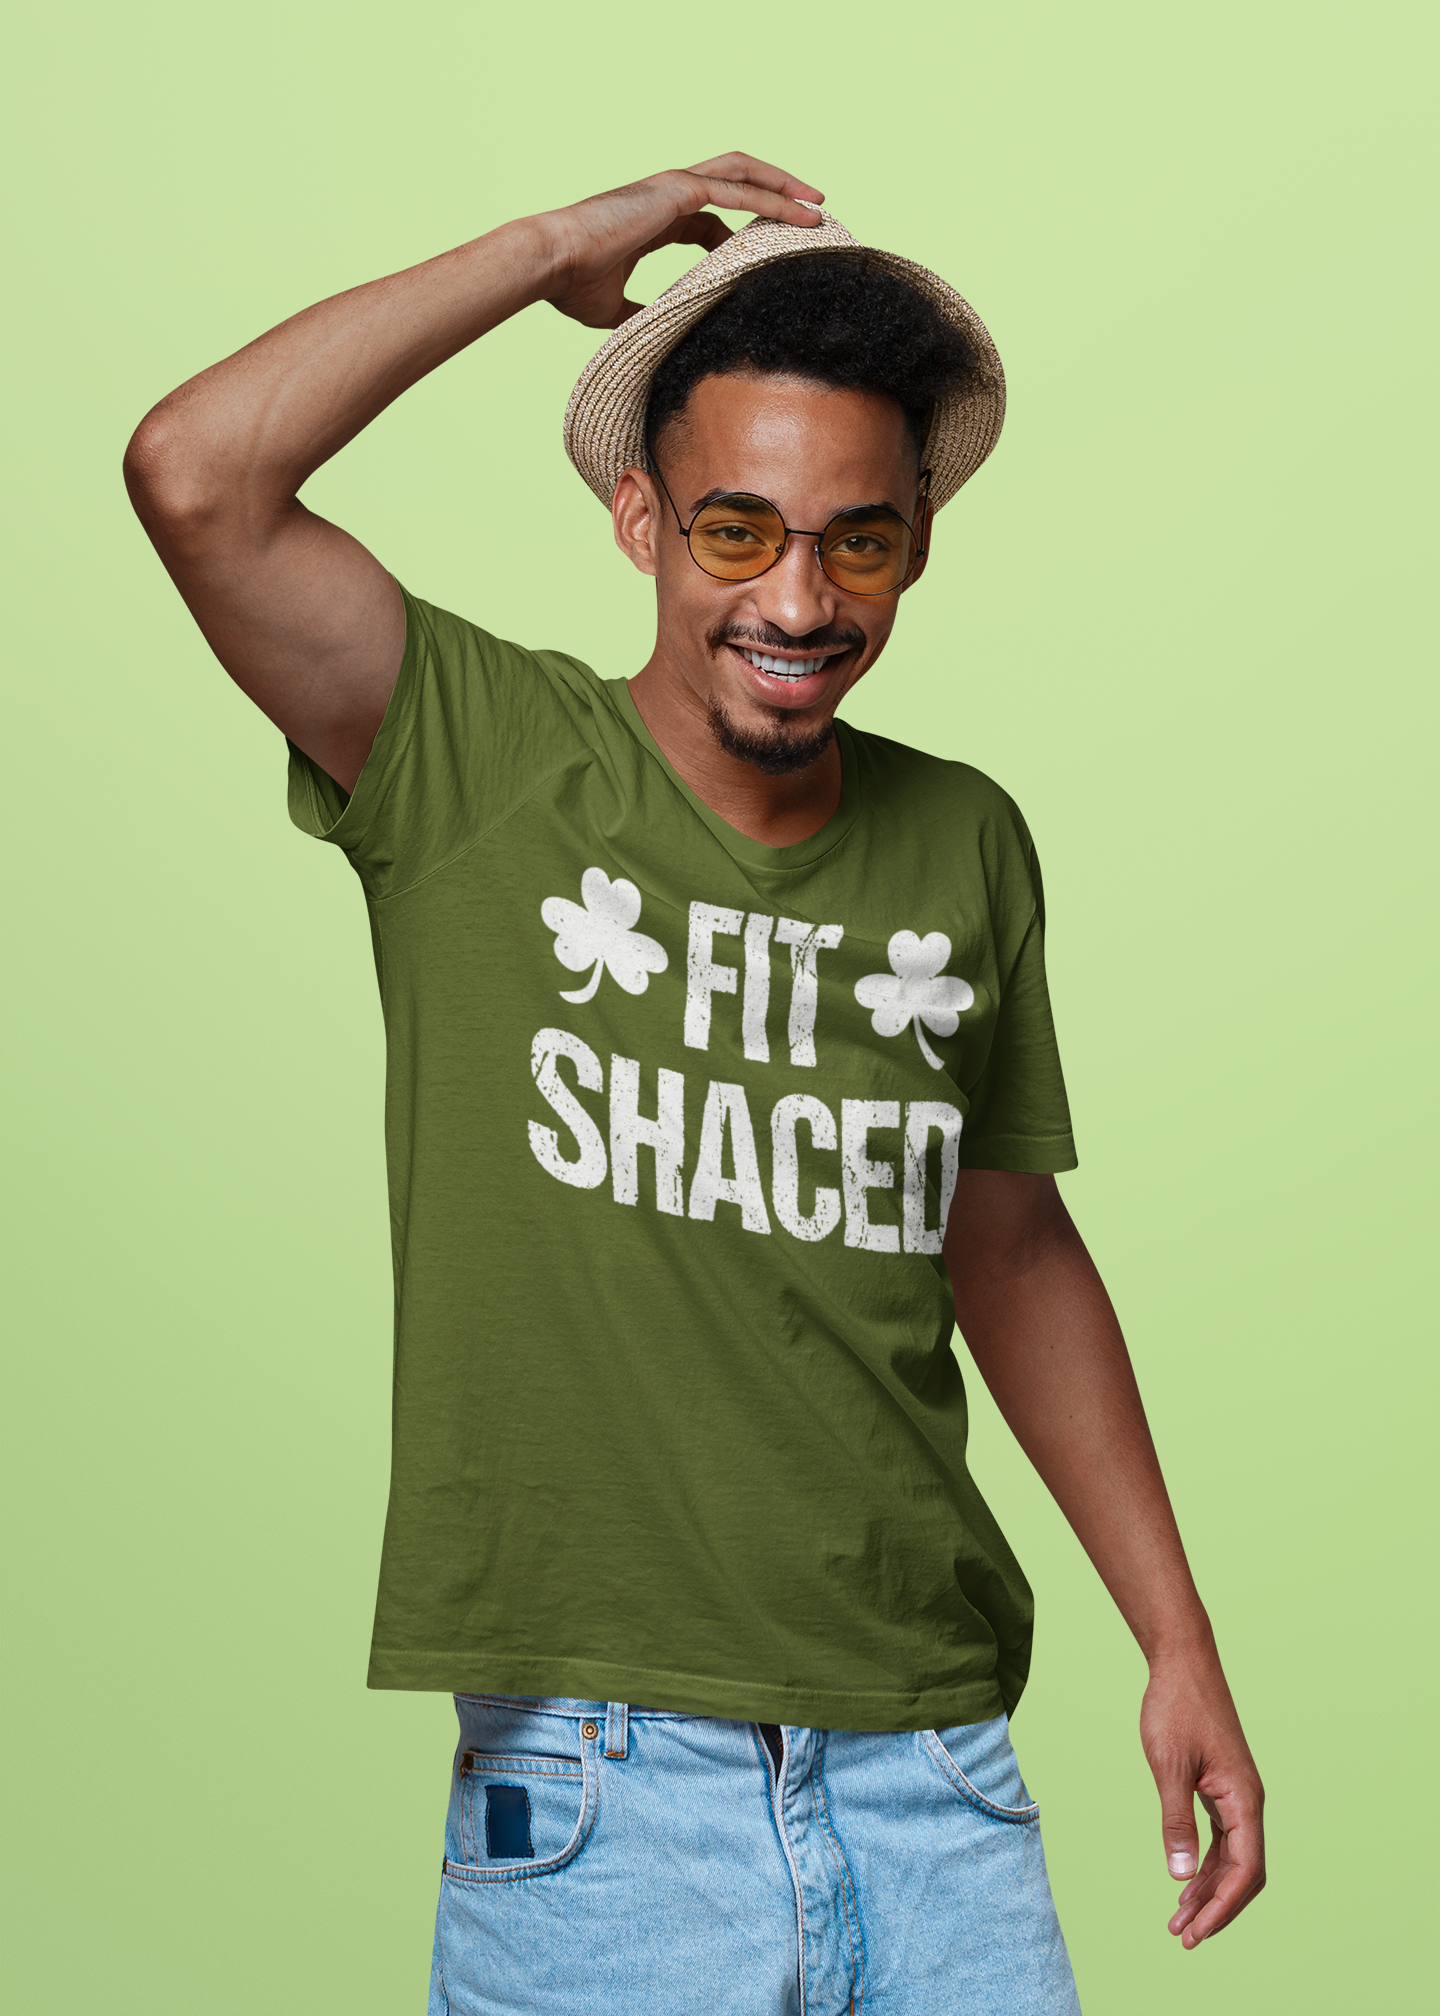 Men's Funny Fit Shaced Shirt St Patrick's Day T Shirt Dr